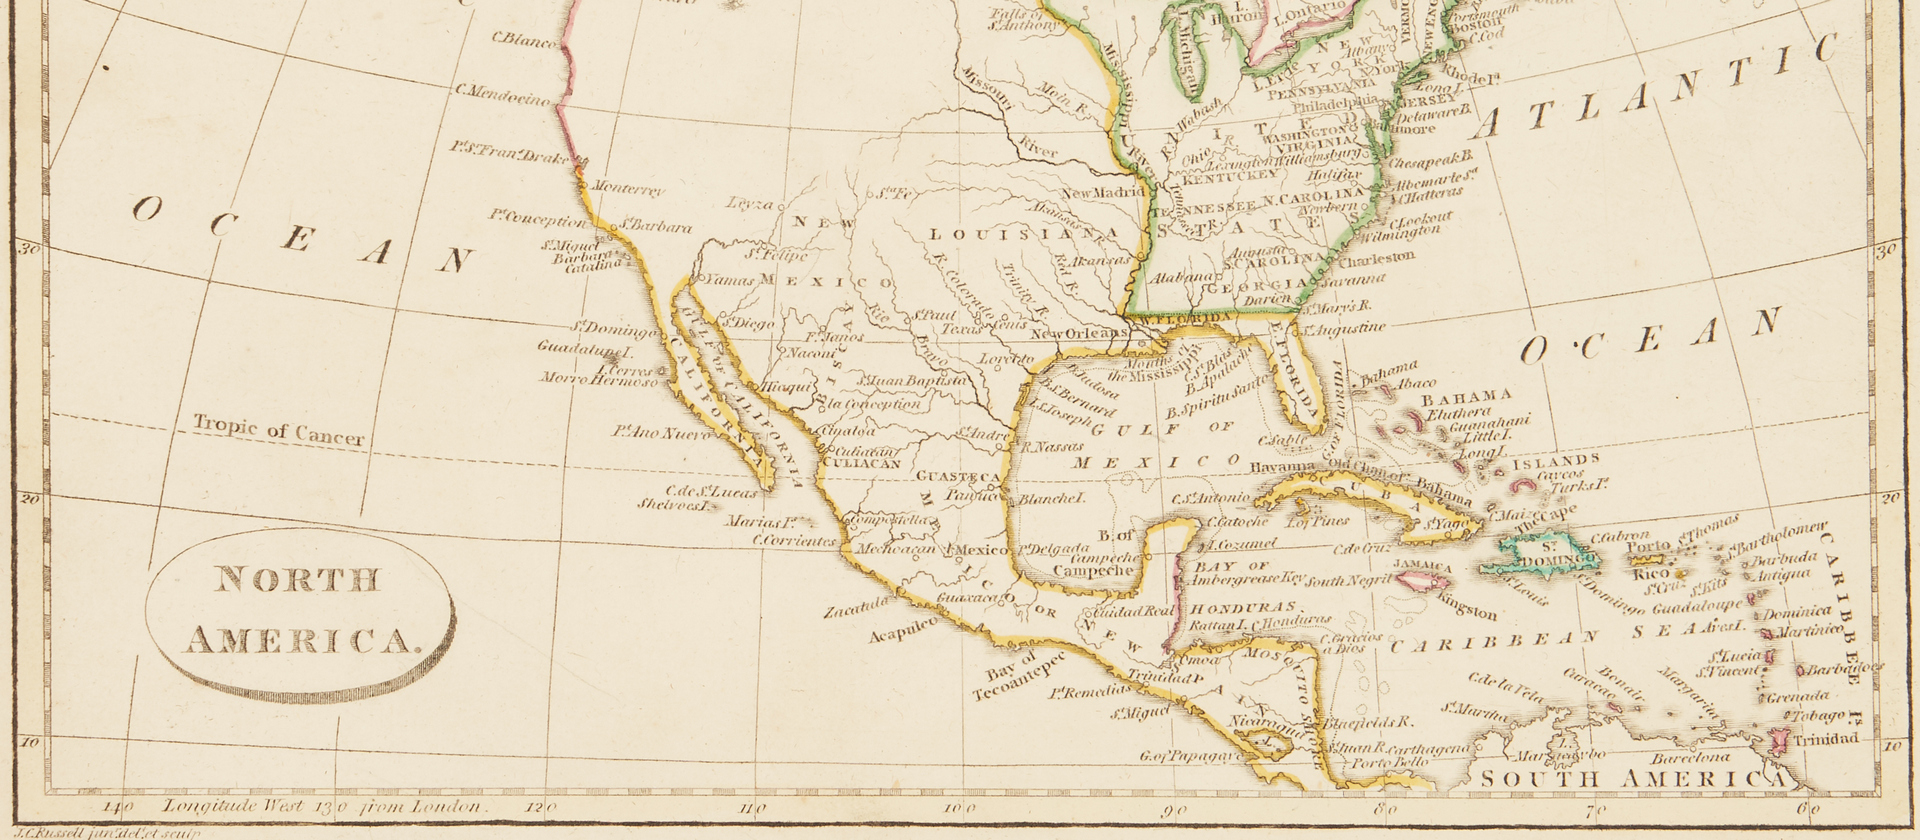 Lot 710: Group of 4 Maps, incl. North America & Mexico